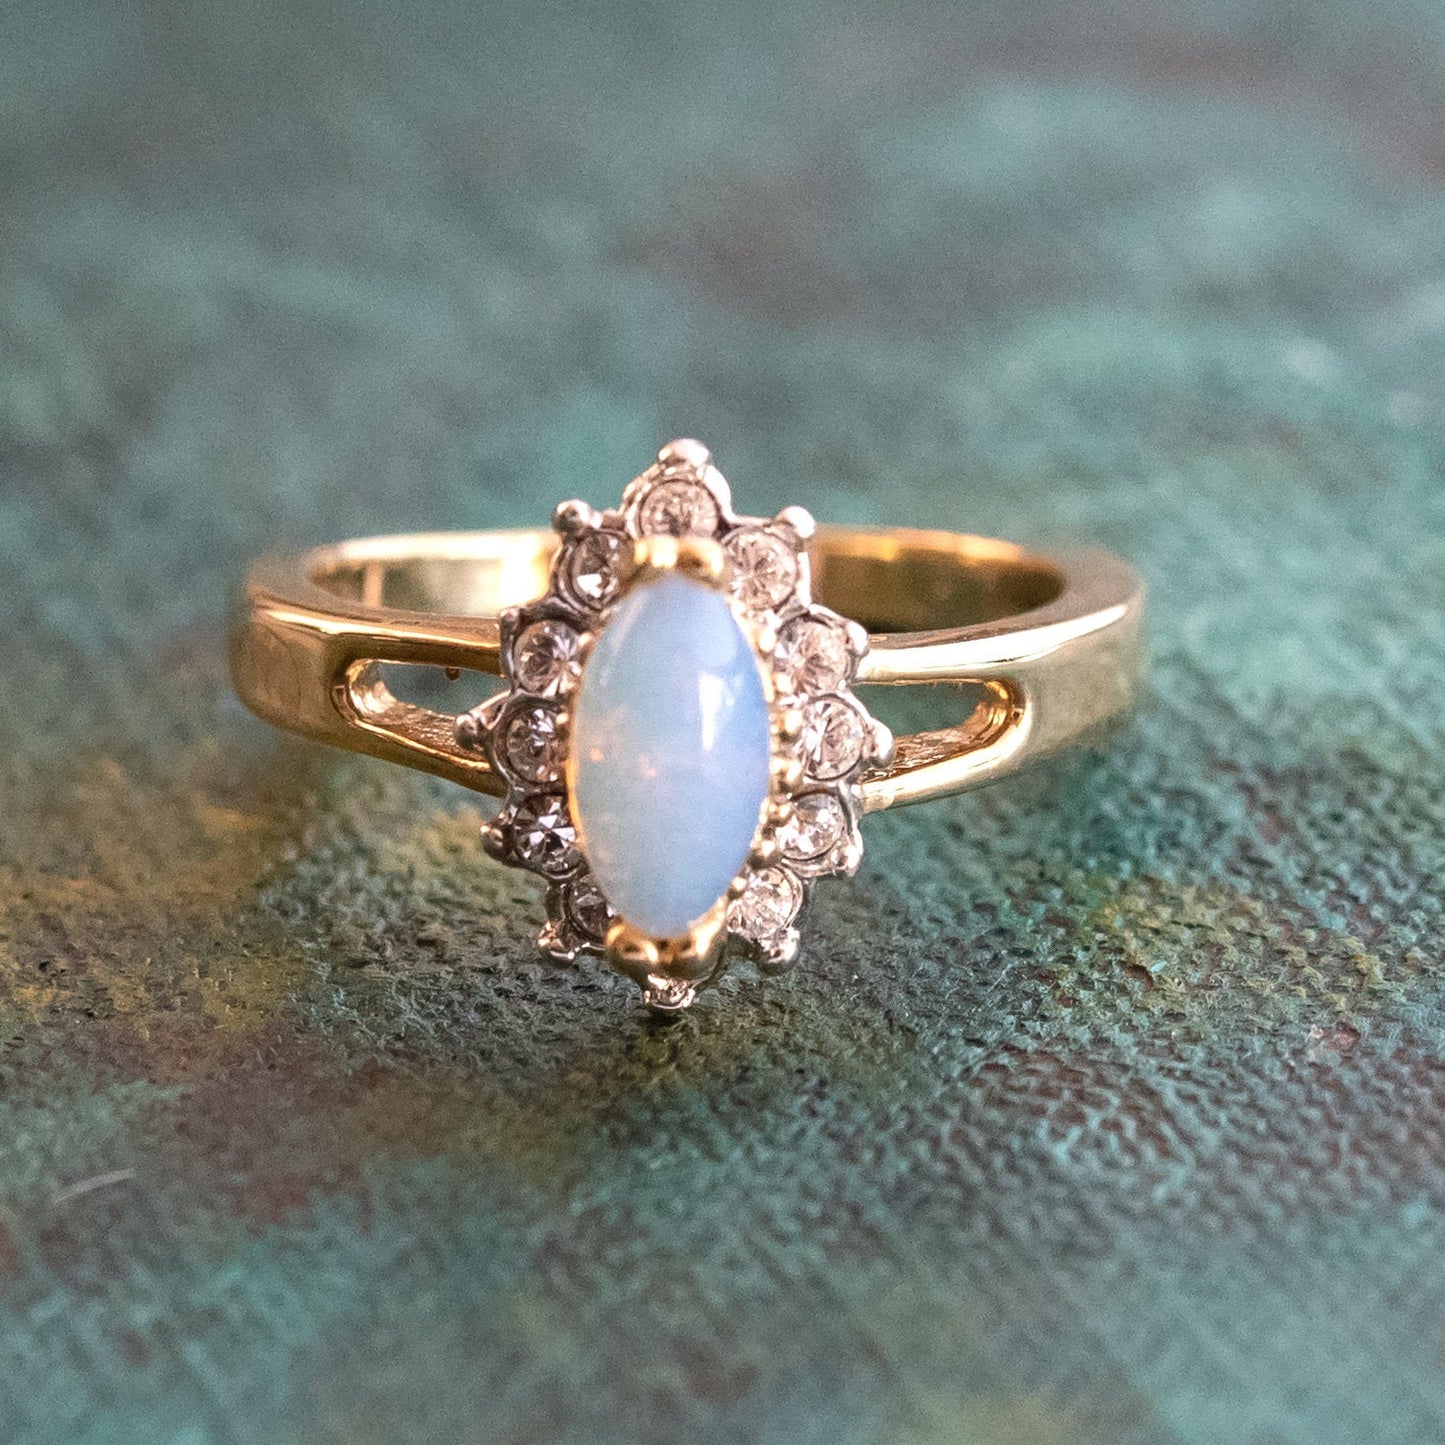 Vintage Ring Aquamarine and Clear Austrian Crystals 18kt White Gold Electroplated Made in USA by PVD Vintage Jewelry